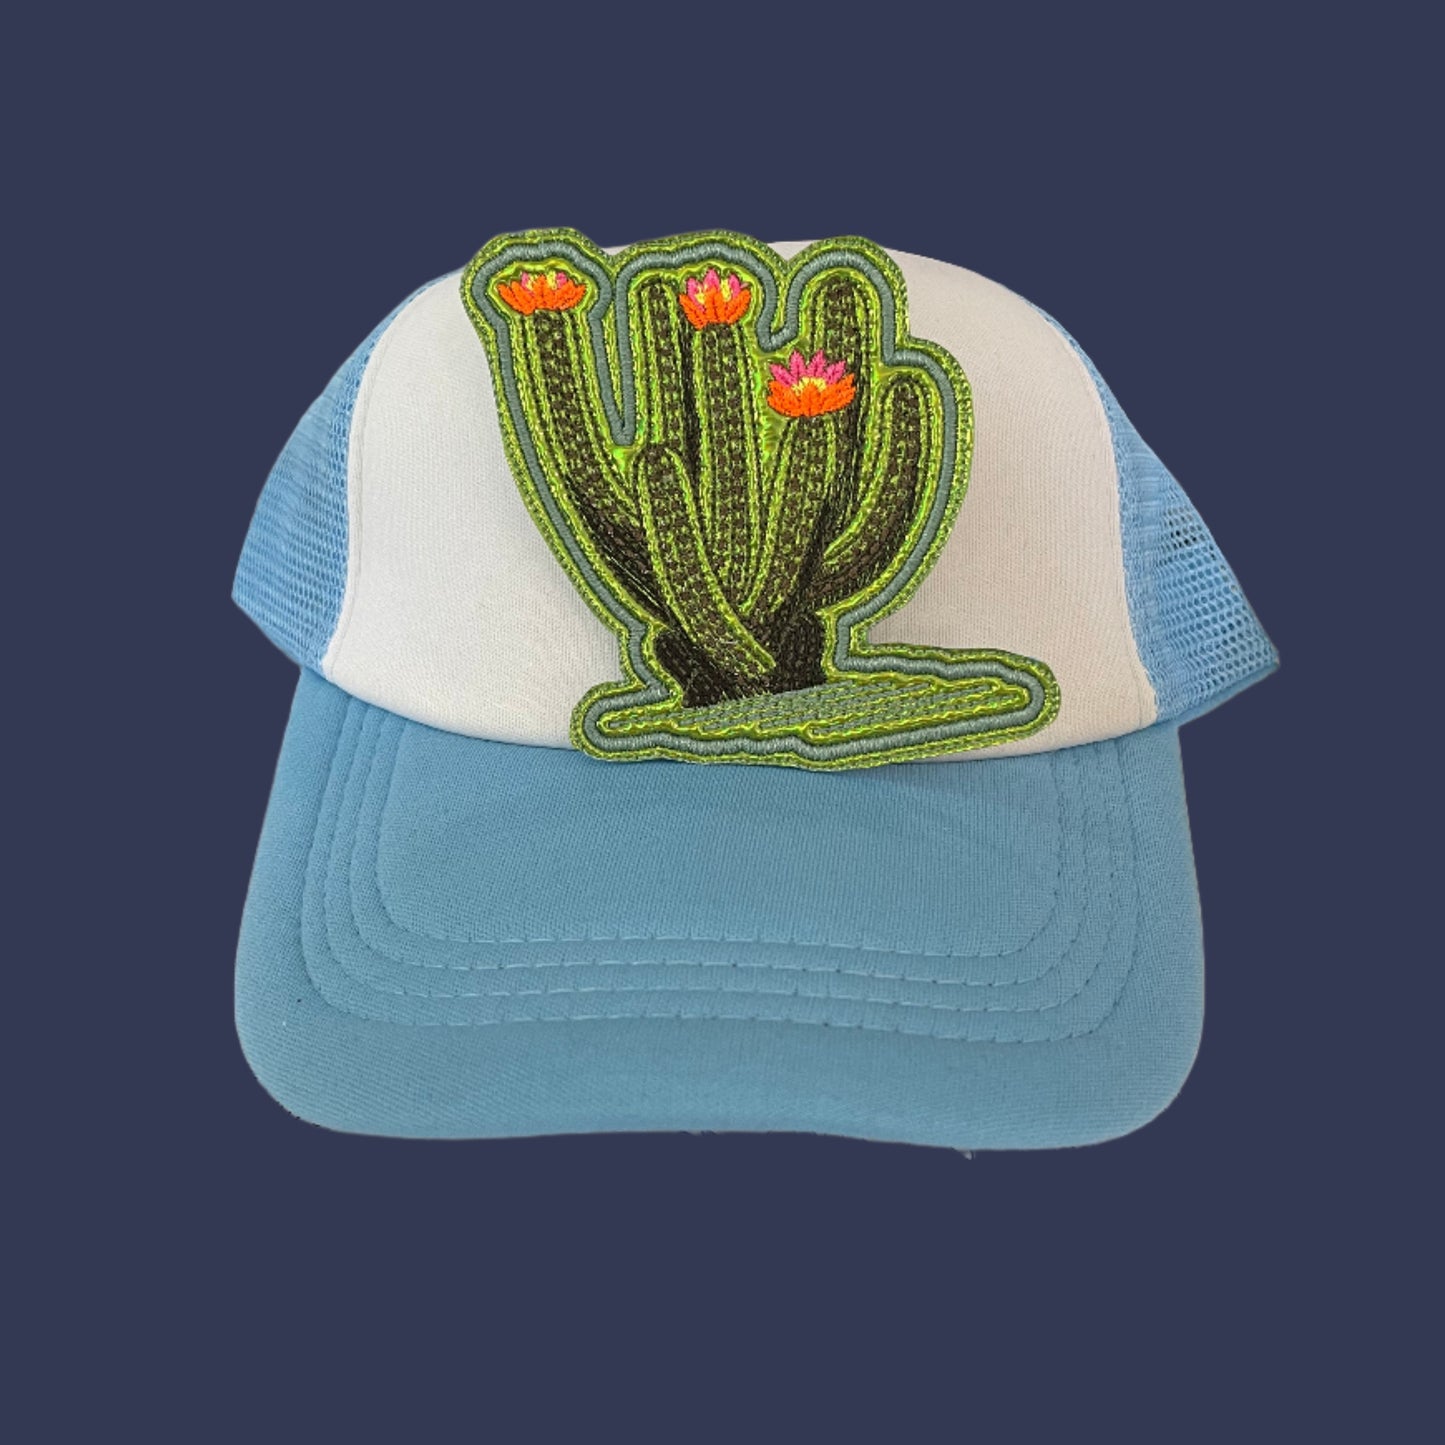 Iron-on patch featuring a large leggy cactus with neon pink, neon yellow, and neon orange flowers, green metallic vinyl showing through stitching gaps, and an aqua outline.